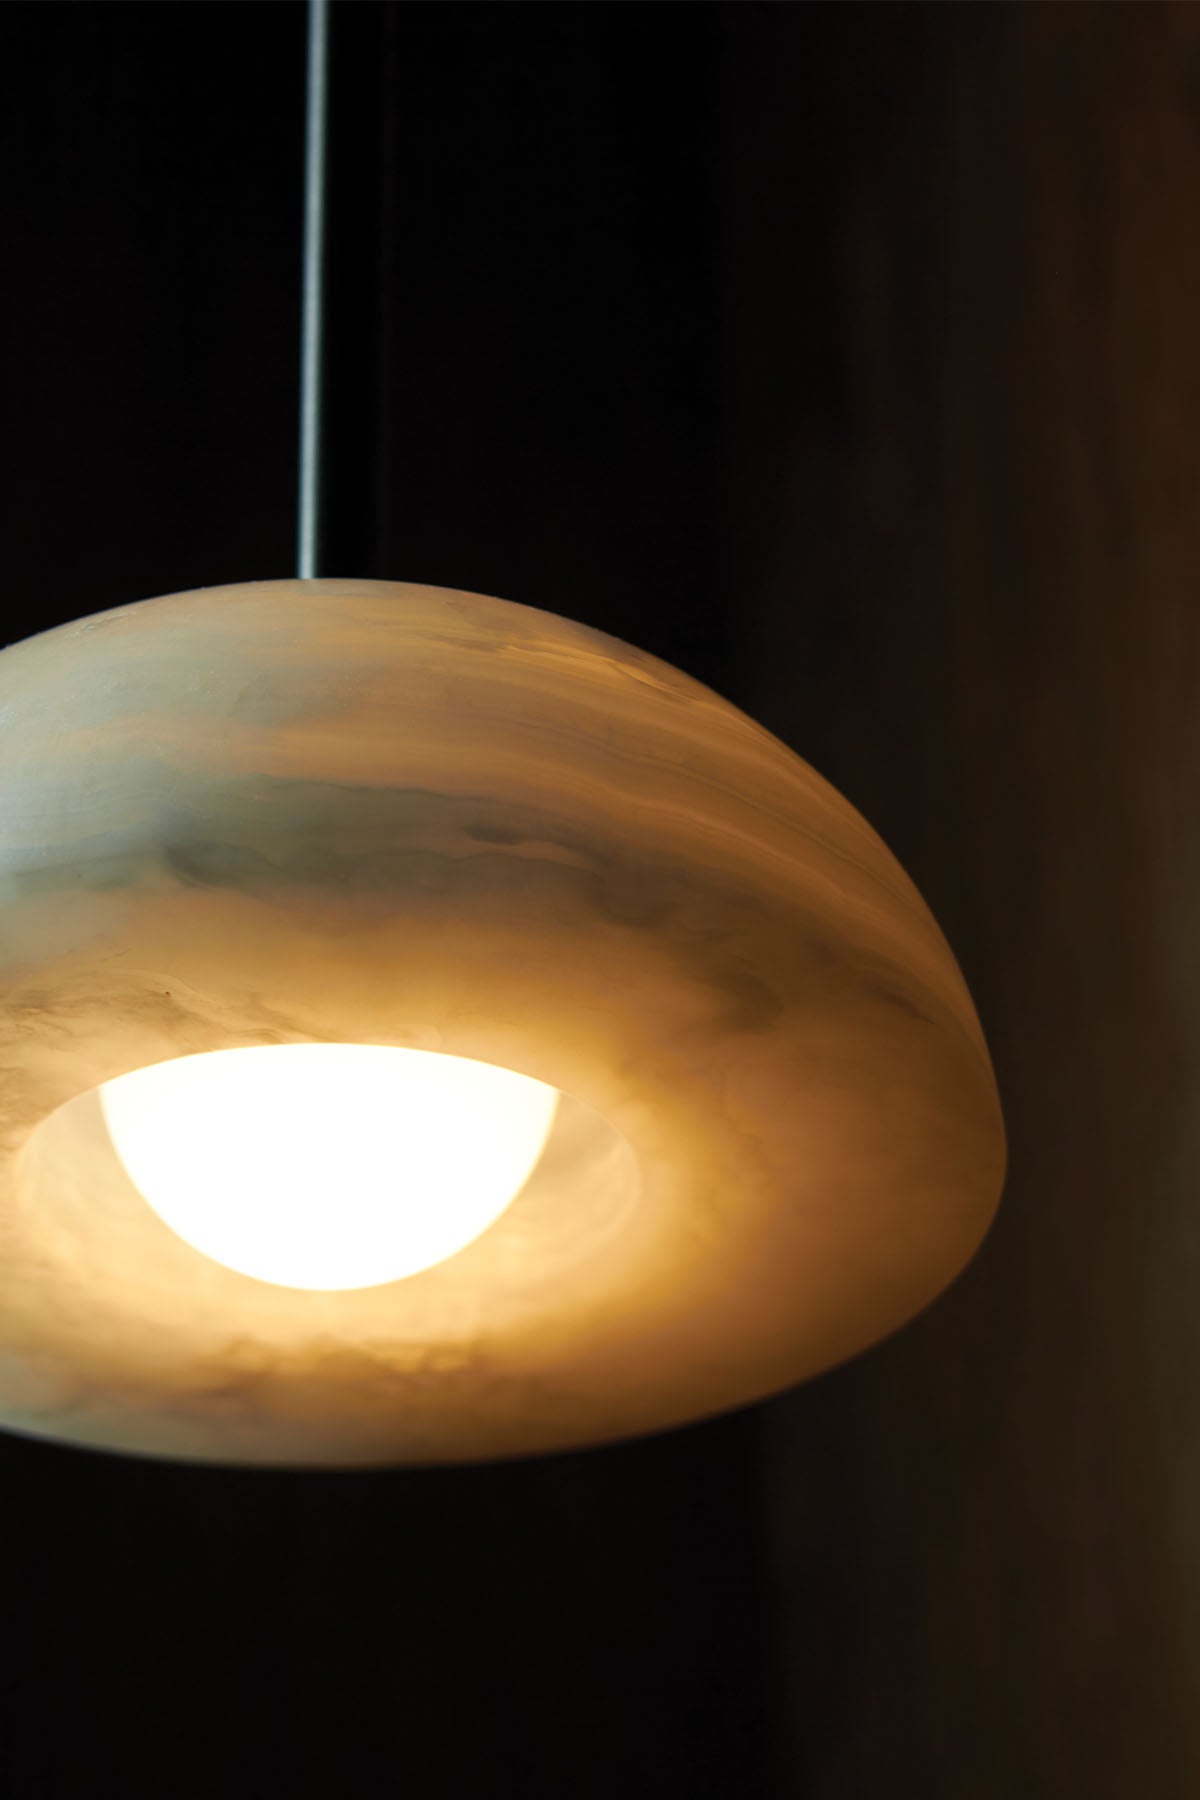 Aurelia Pendant Light, in White Onyx and Brushed Black. Image by Lawrence Furzey.